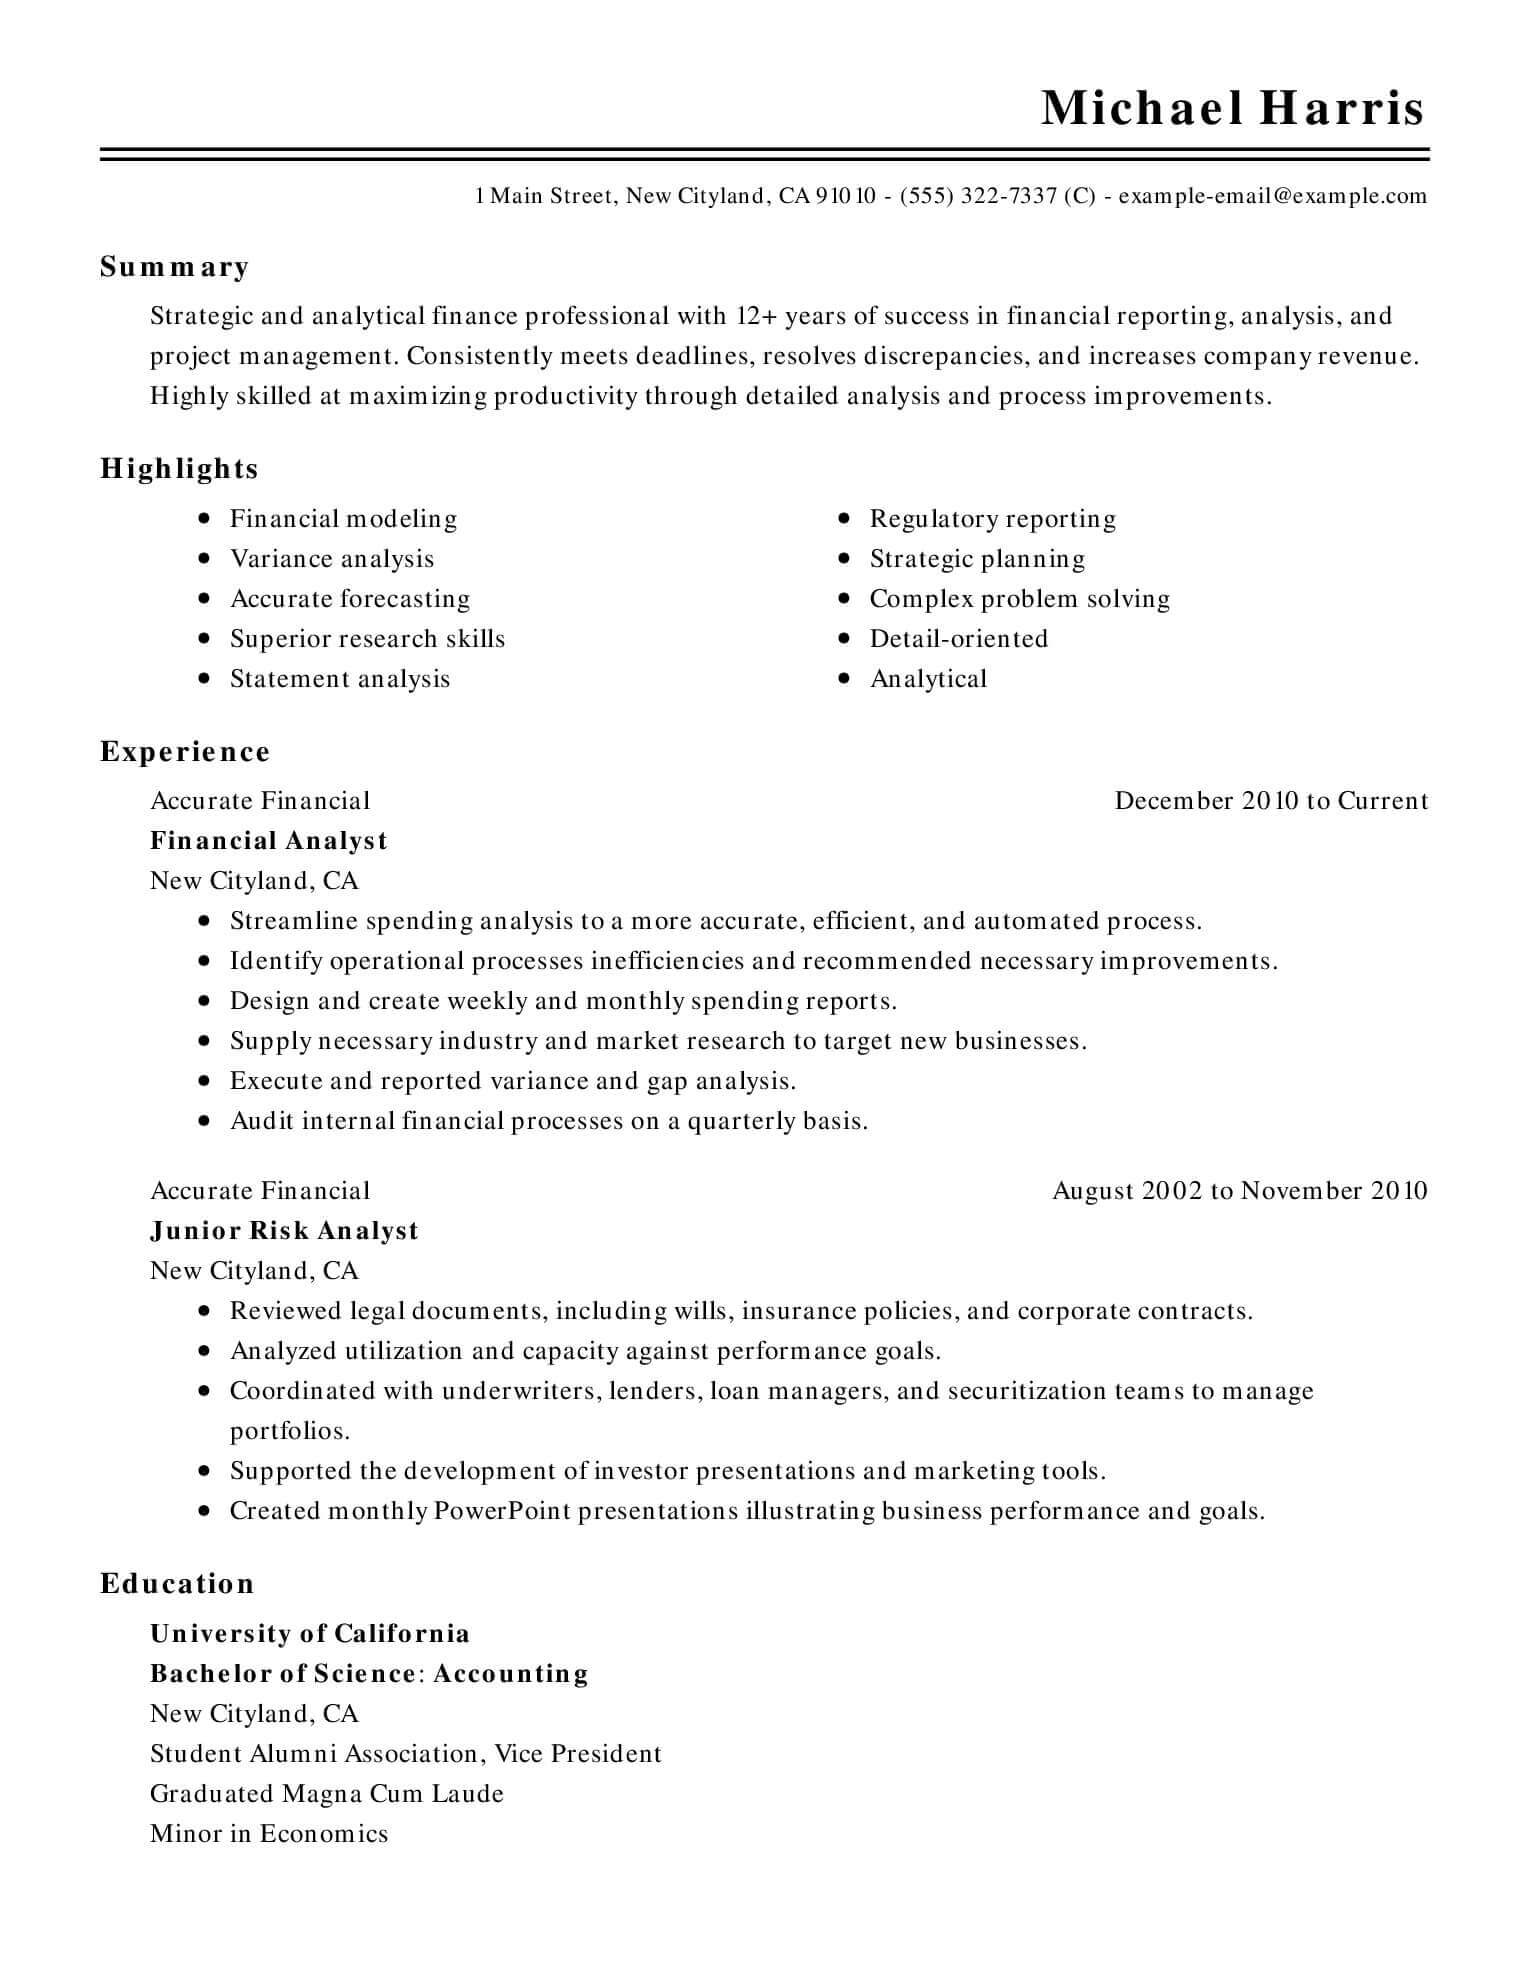 15 Of The Best Resume Templates For Microsoft Word Office Regarding Resume Templates Word 2010